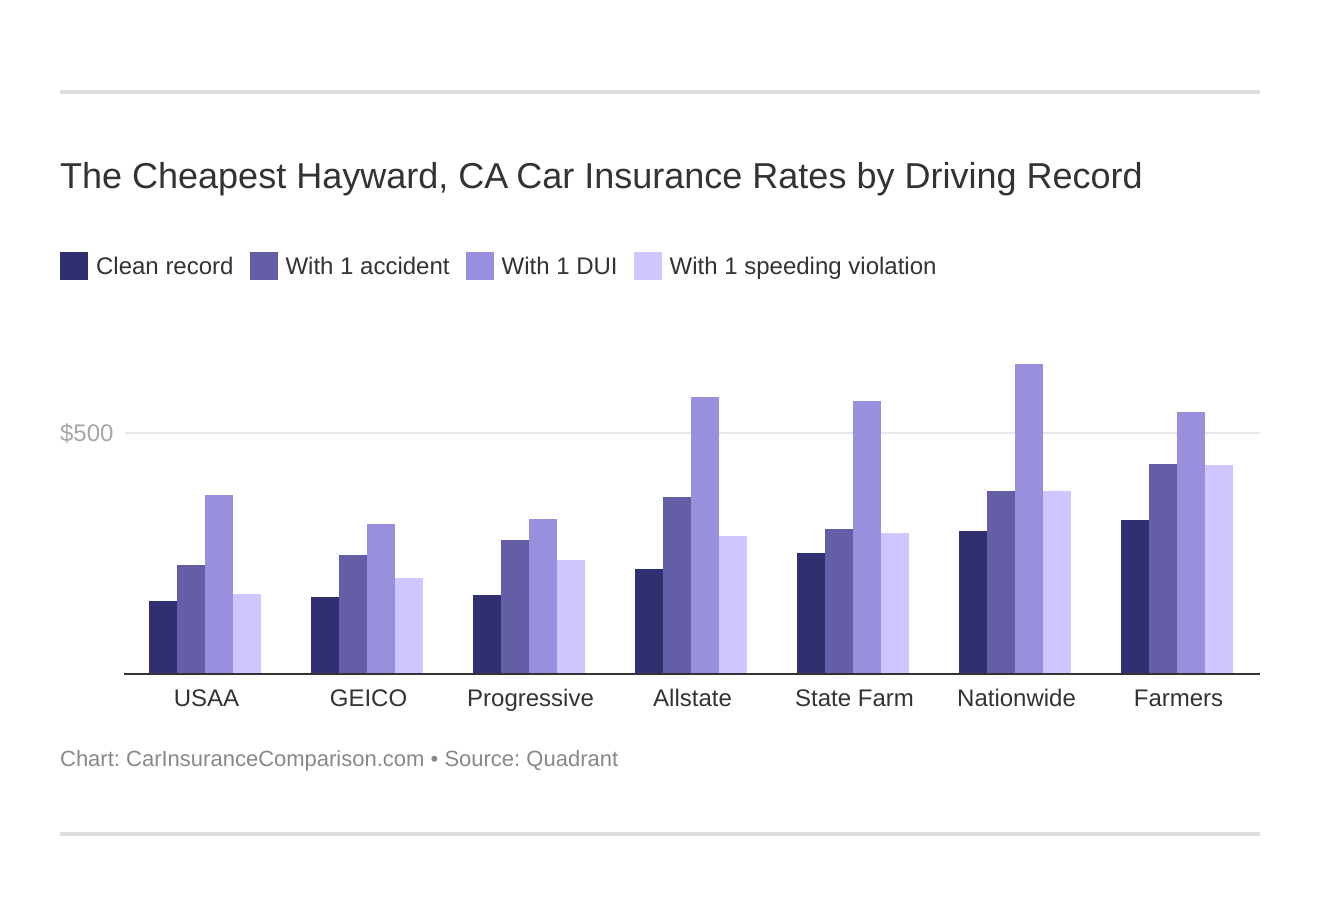 The Cheapest Hayward, CA Car Insurance Rates by Driving Record